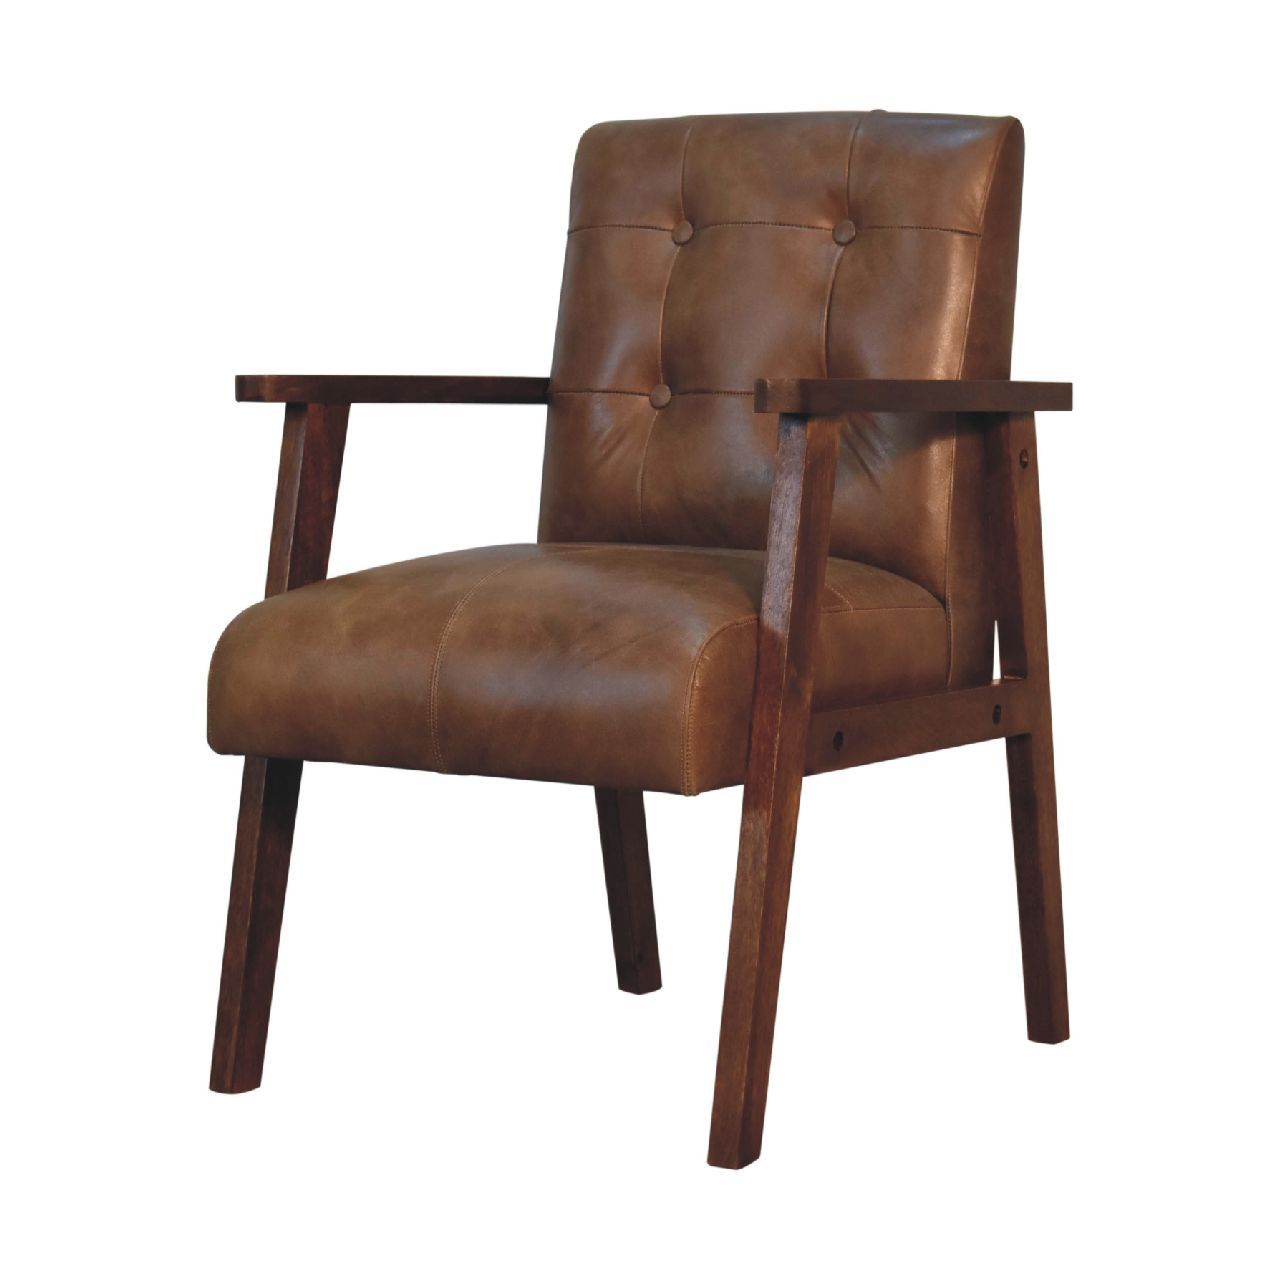 Brown Buffalo Leather Chair - Chestnut Leather